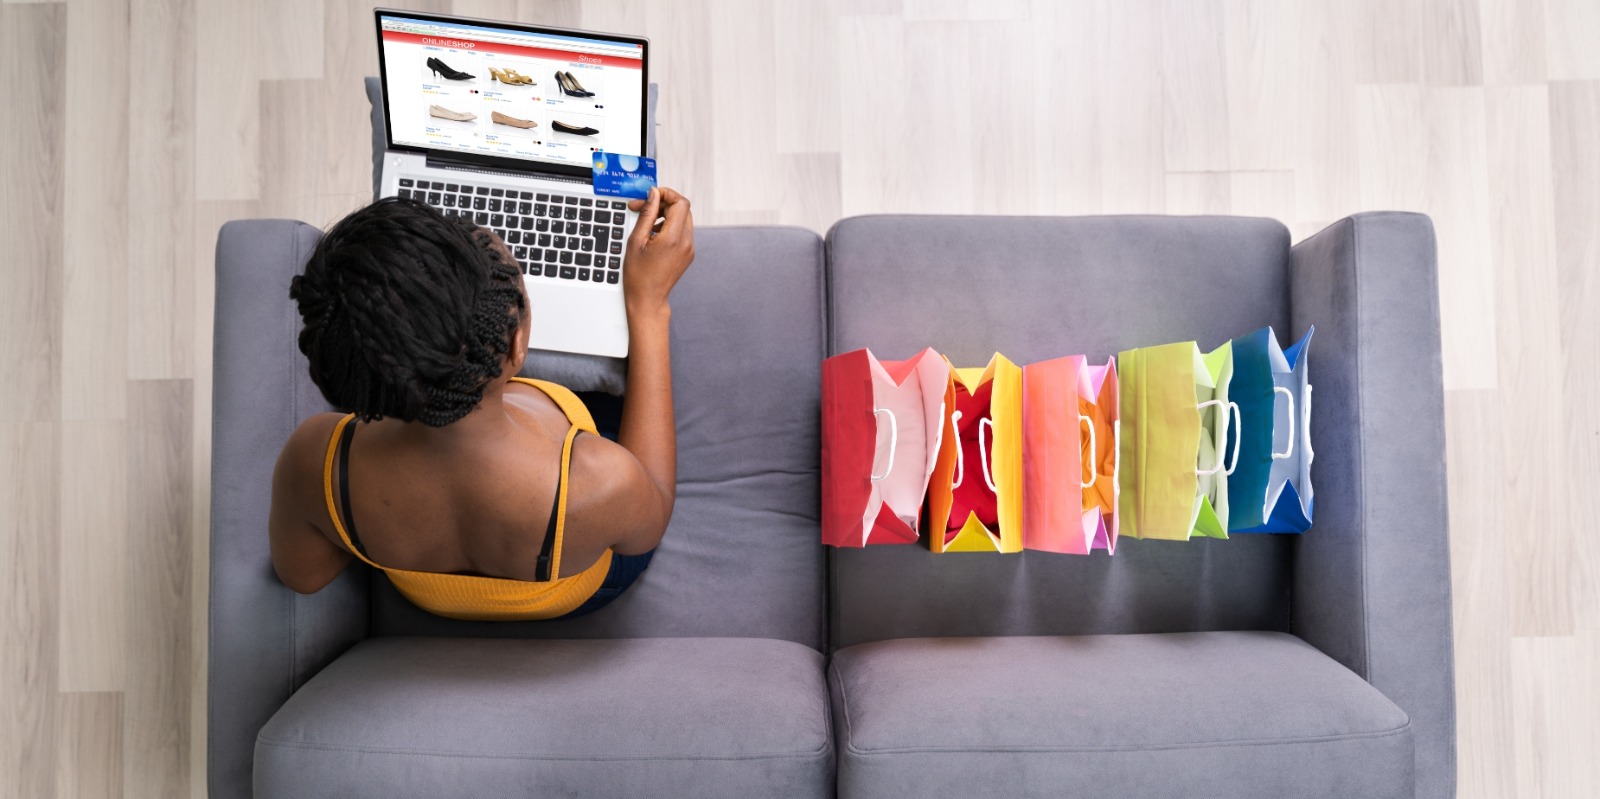 E-Commerce And Digital Store Marketing In Nigeria 2023: Trends, Challenges, And Opportunities